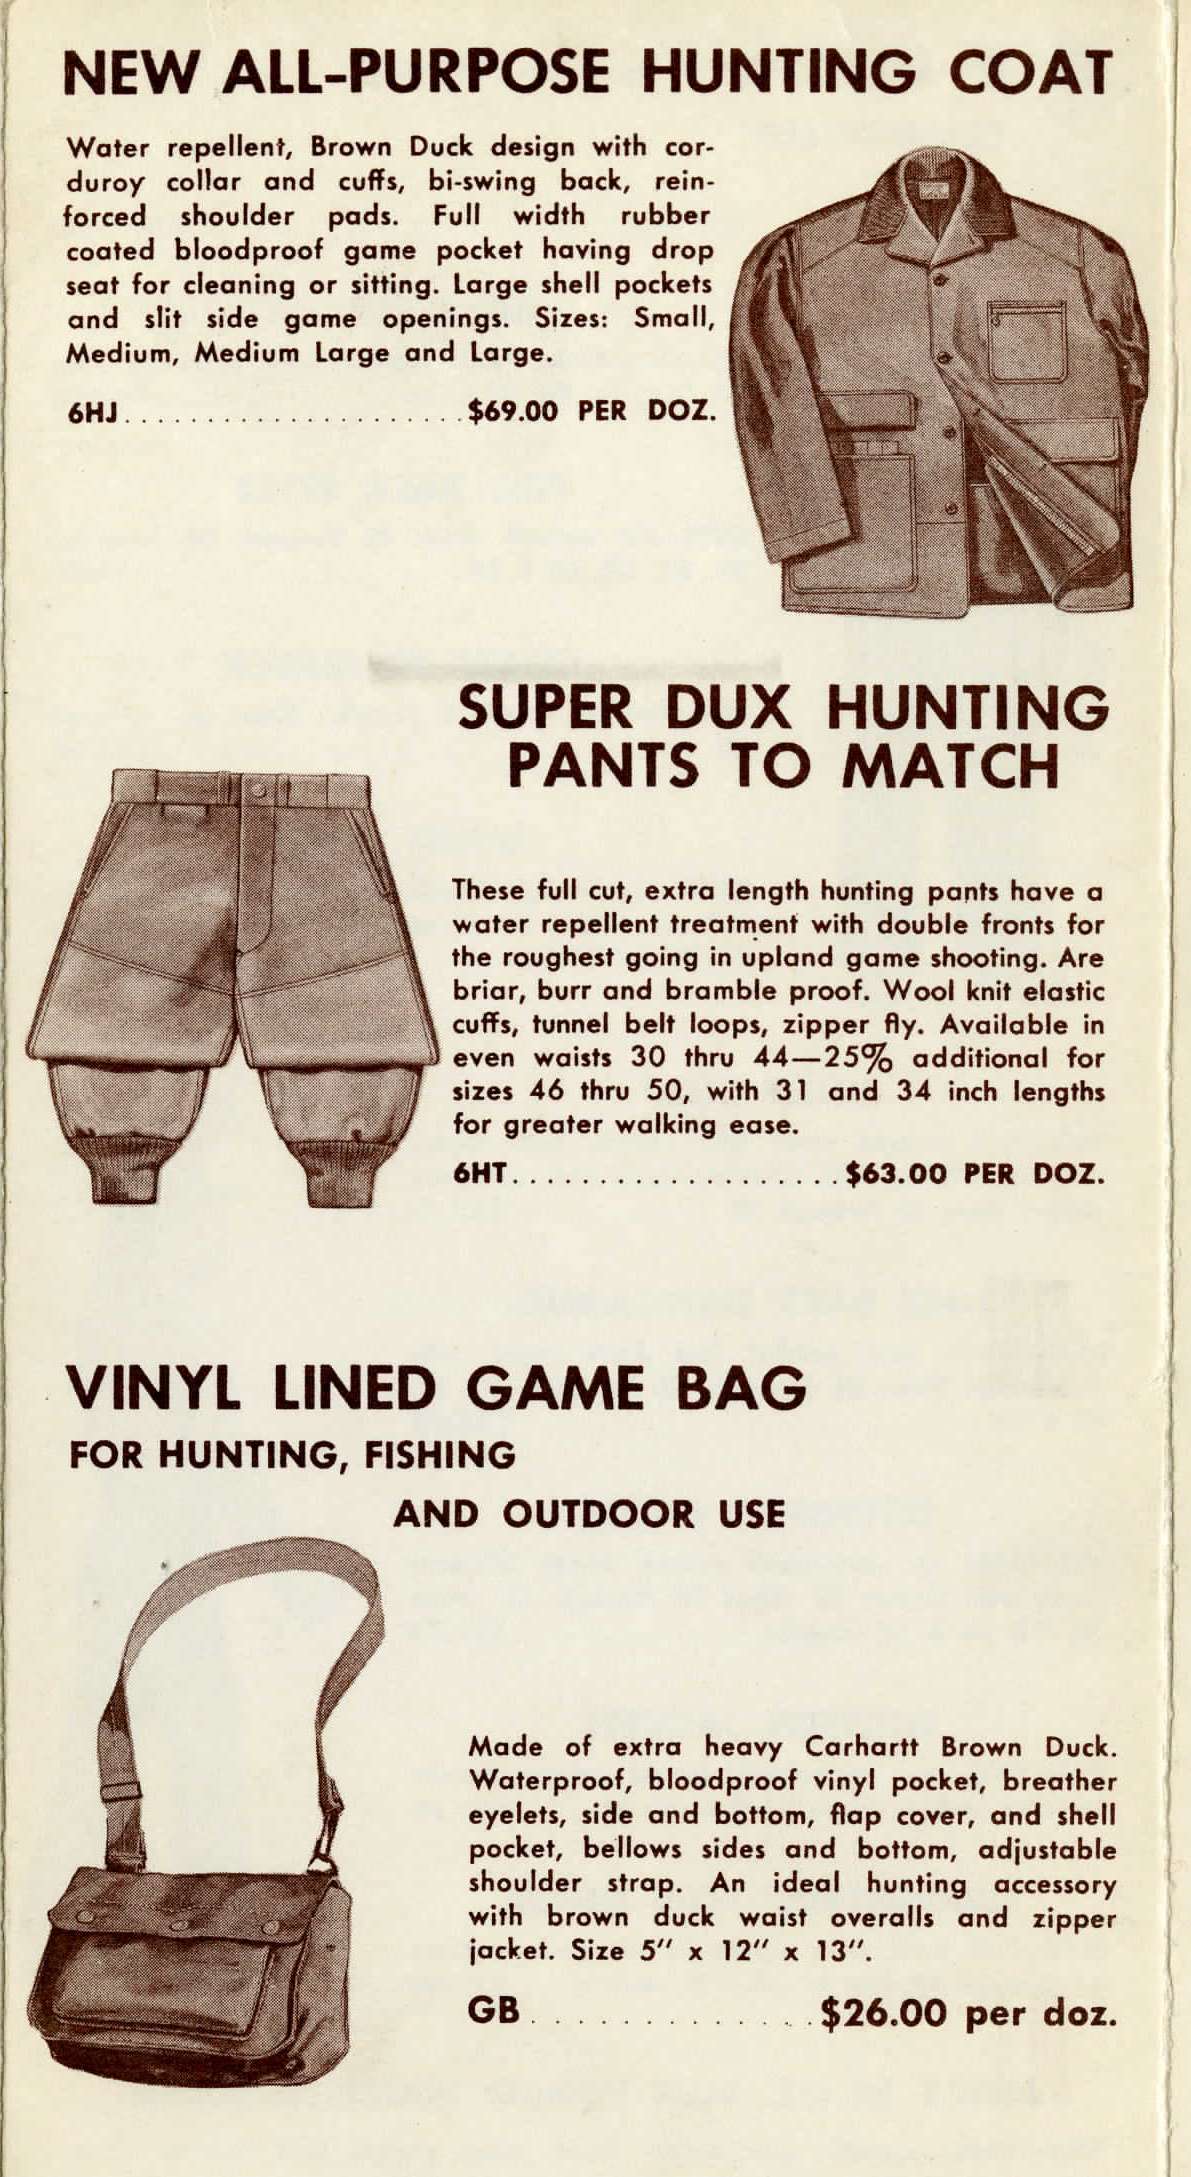 <b>1957-1964:</b> After a long absence, Carhartt re-introduces hunting products. A vinyl-lined game bag, hunting coat, and hunting pants are available, bearing the old Super Dux name.
